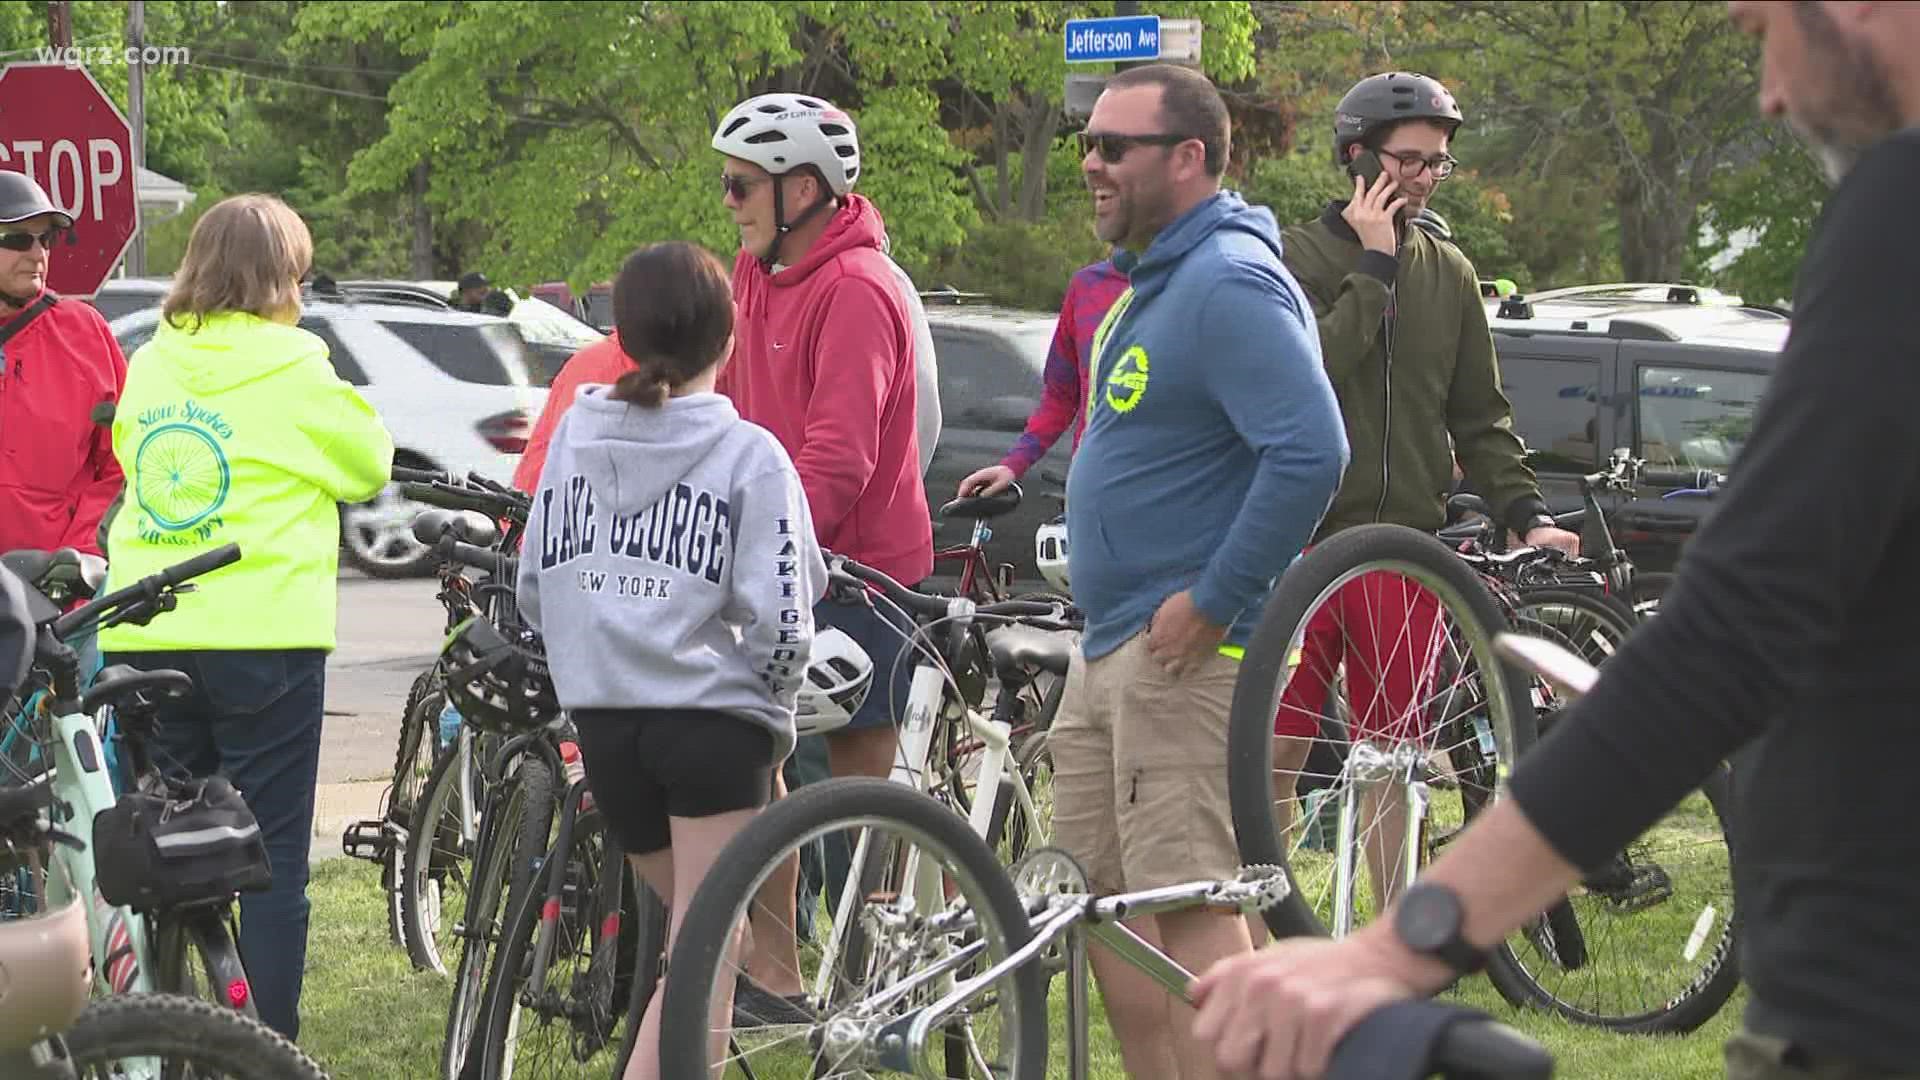 Slow Roll Buffalo returned to the streets Monday night while continuing its support for the East Side.